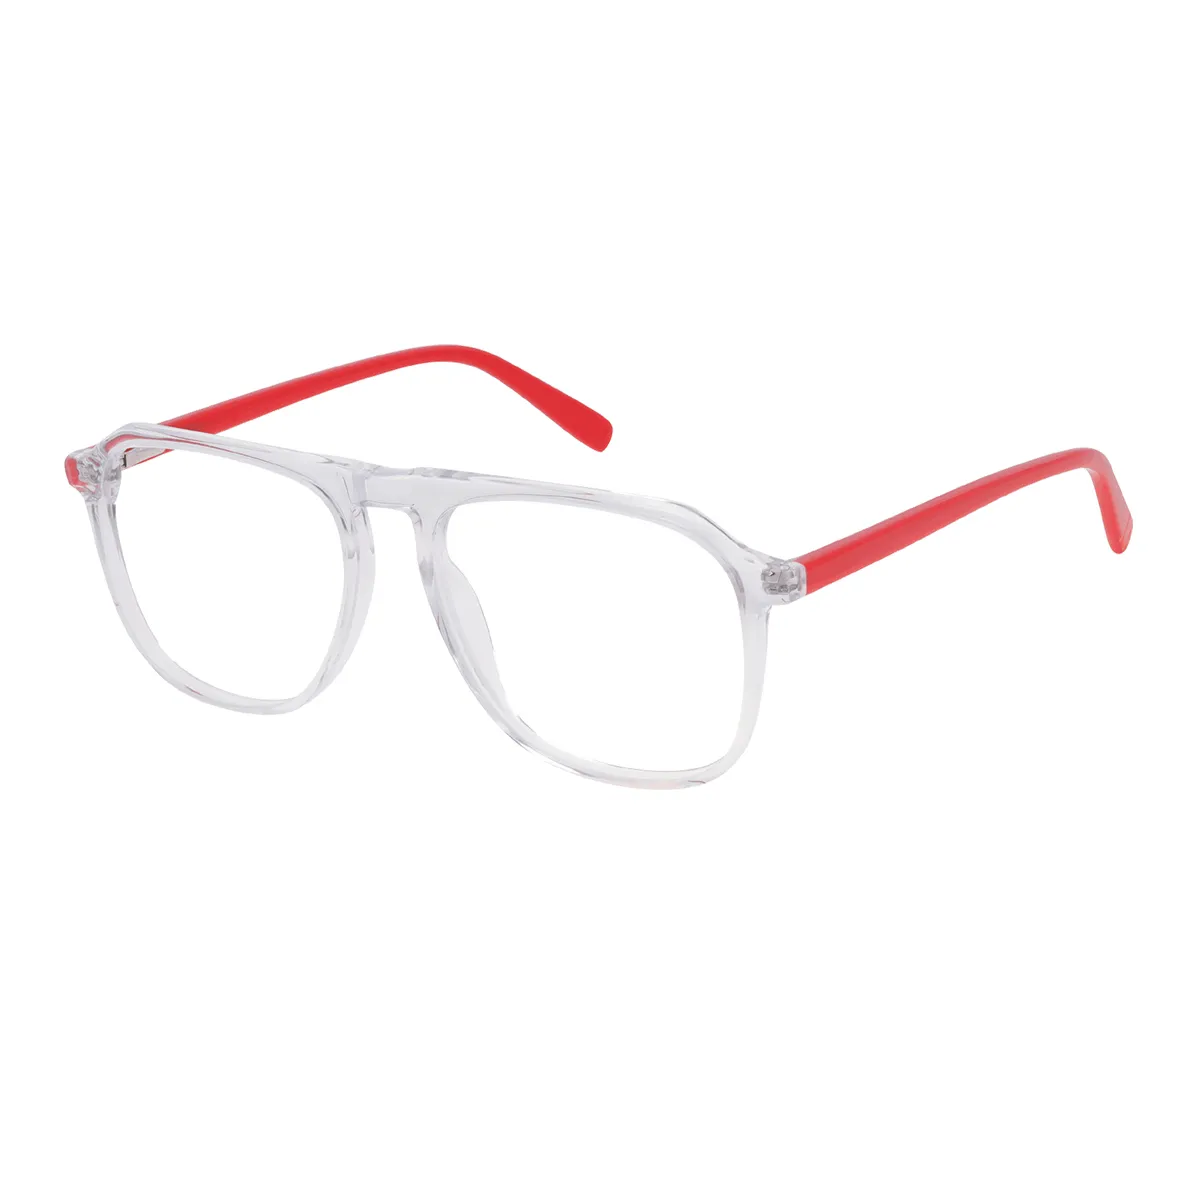 Fashion Browline transparent/red Reading Glasses for Women & Men